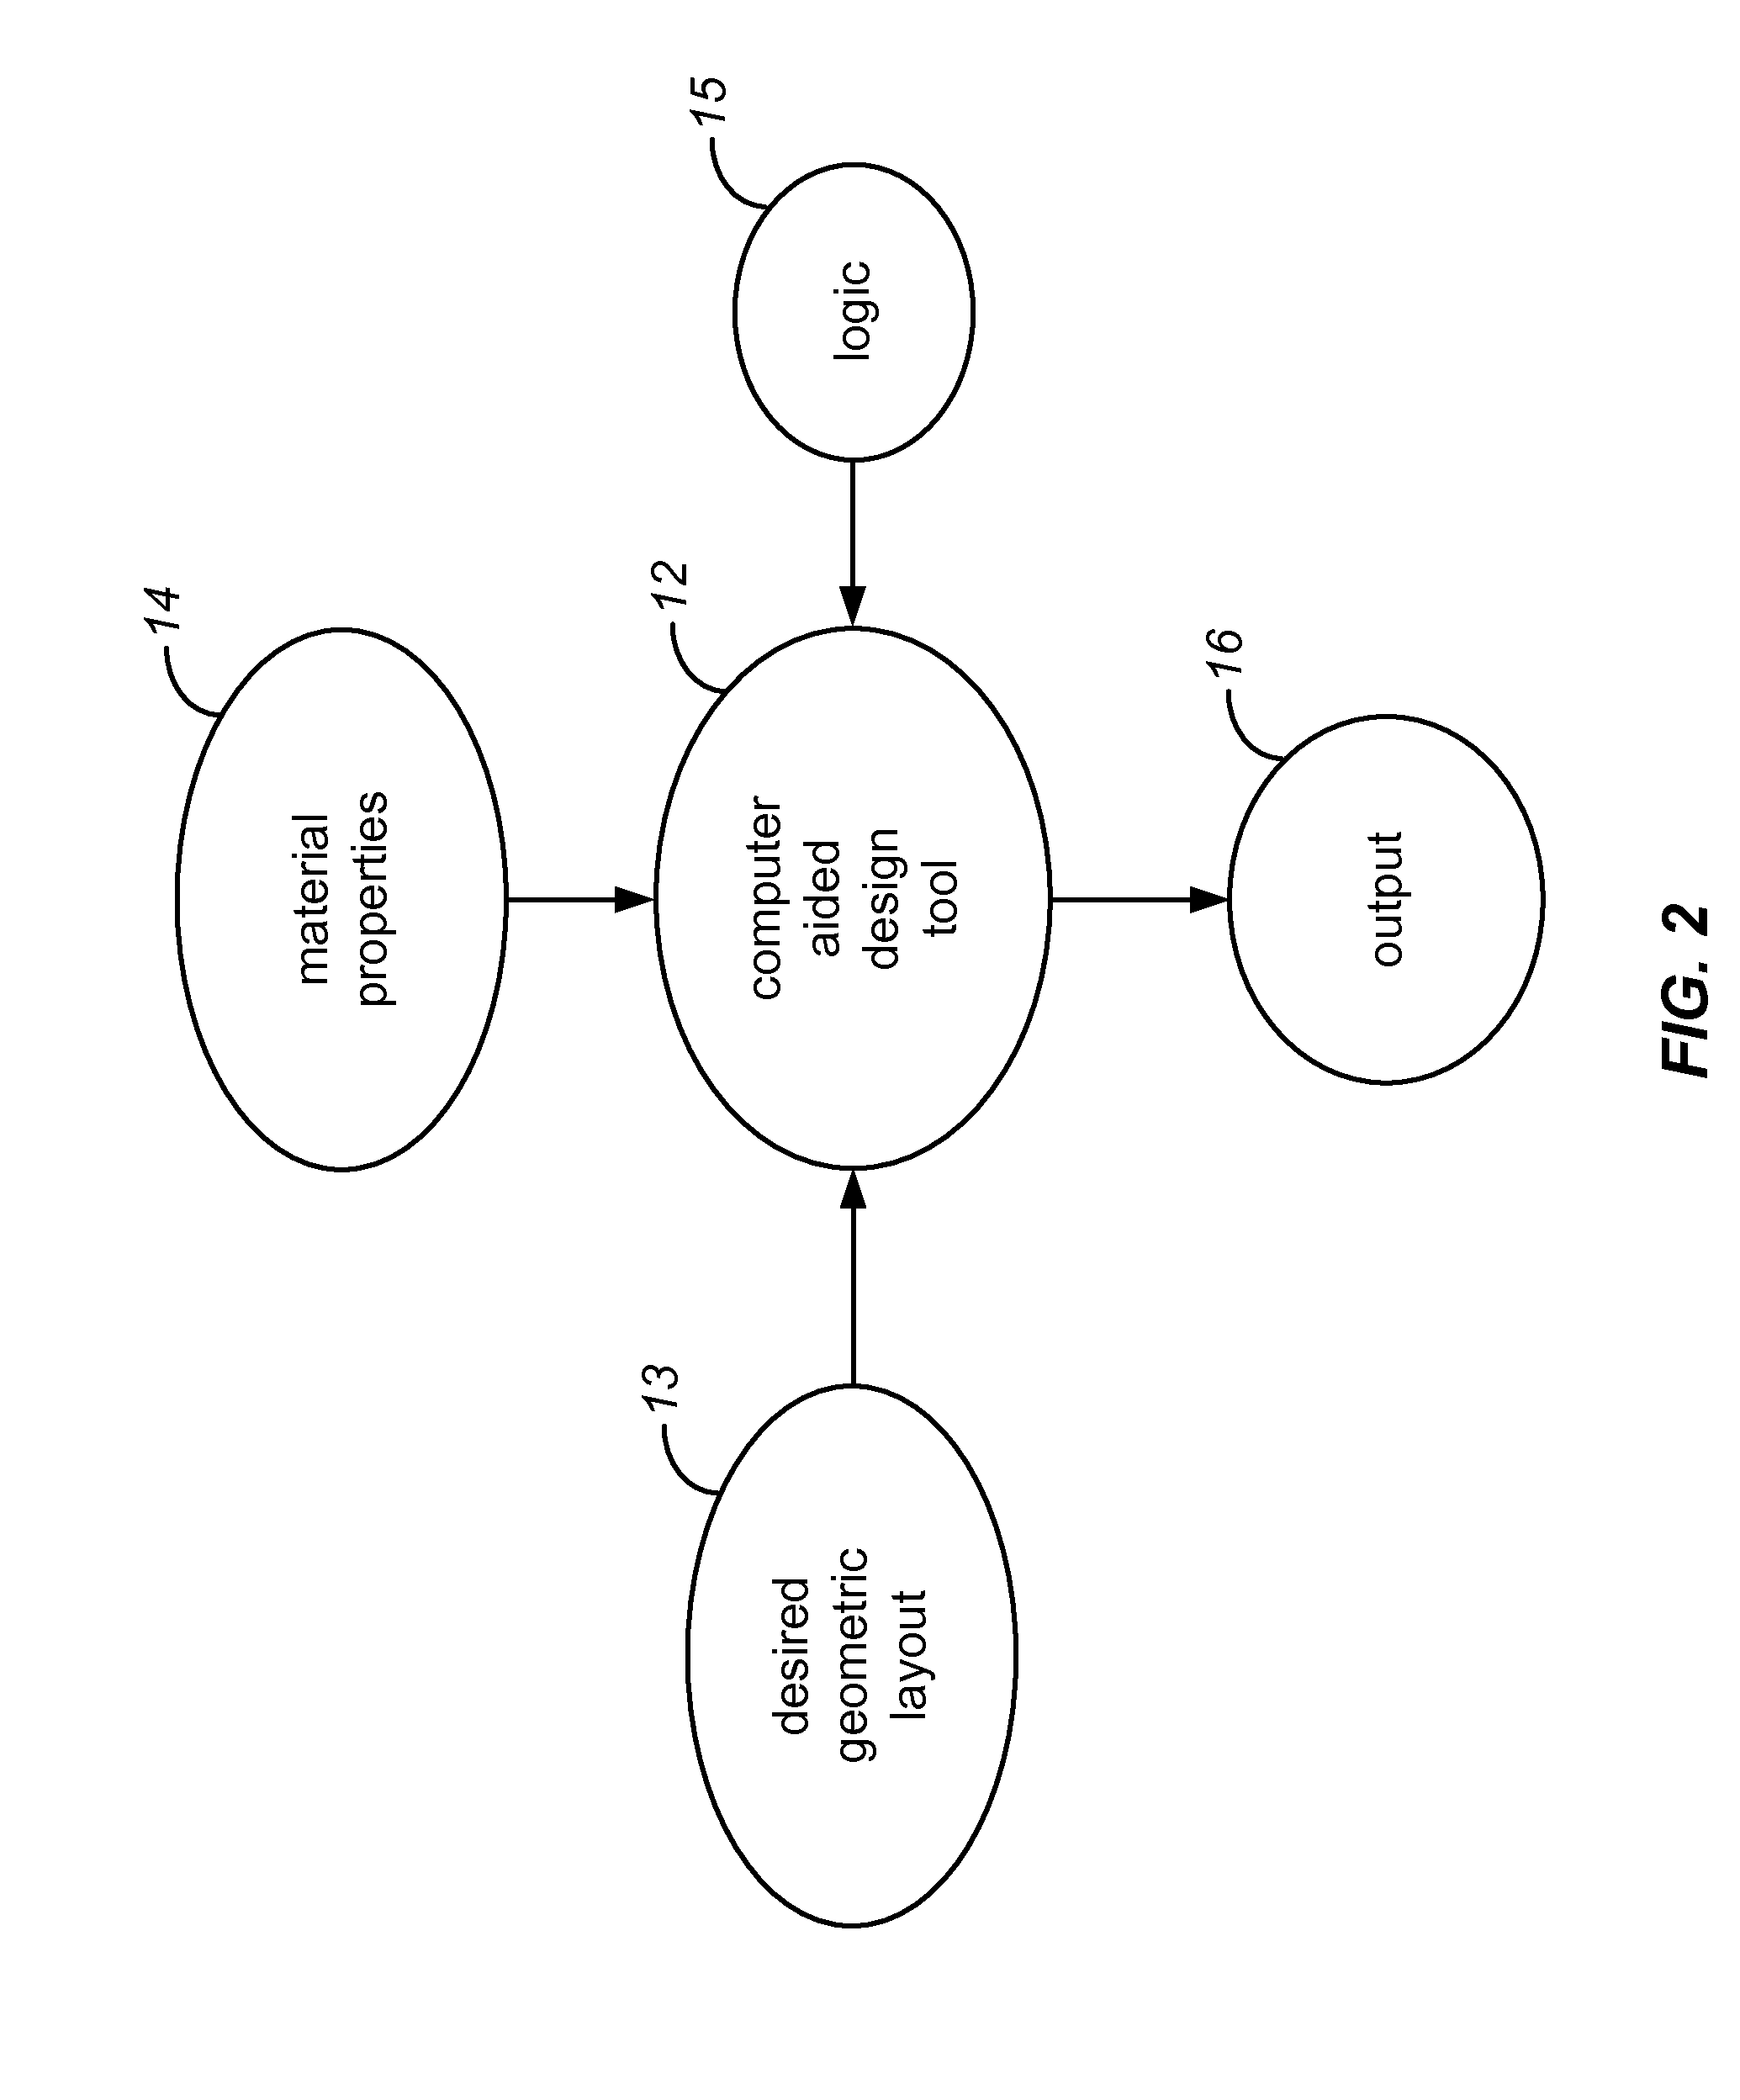 Computational method for design and manufacture of electrochemical systems